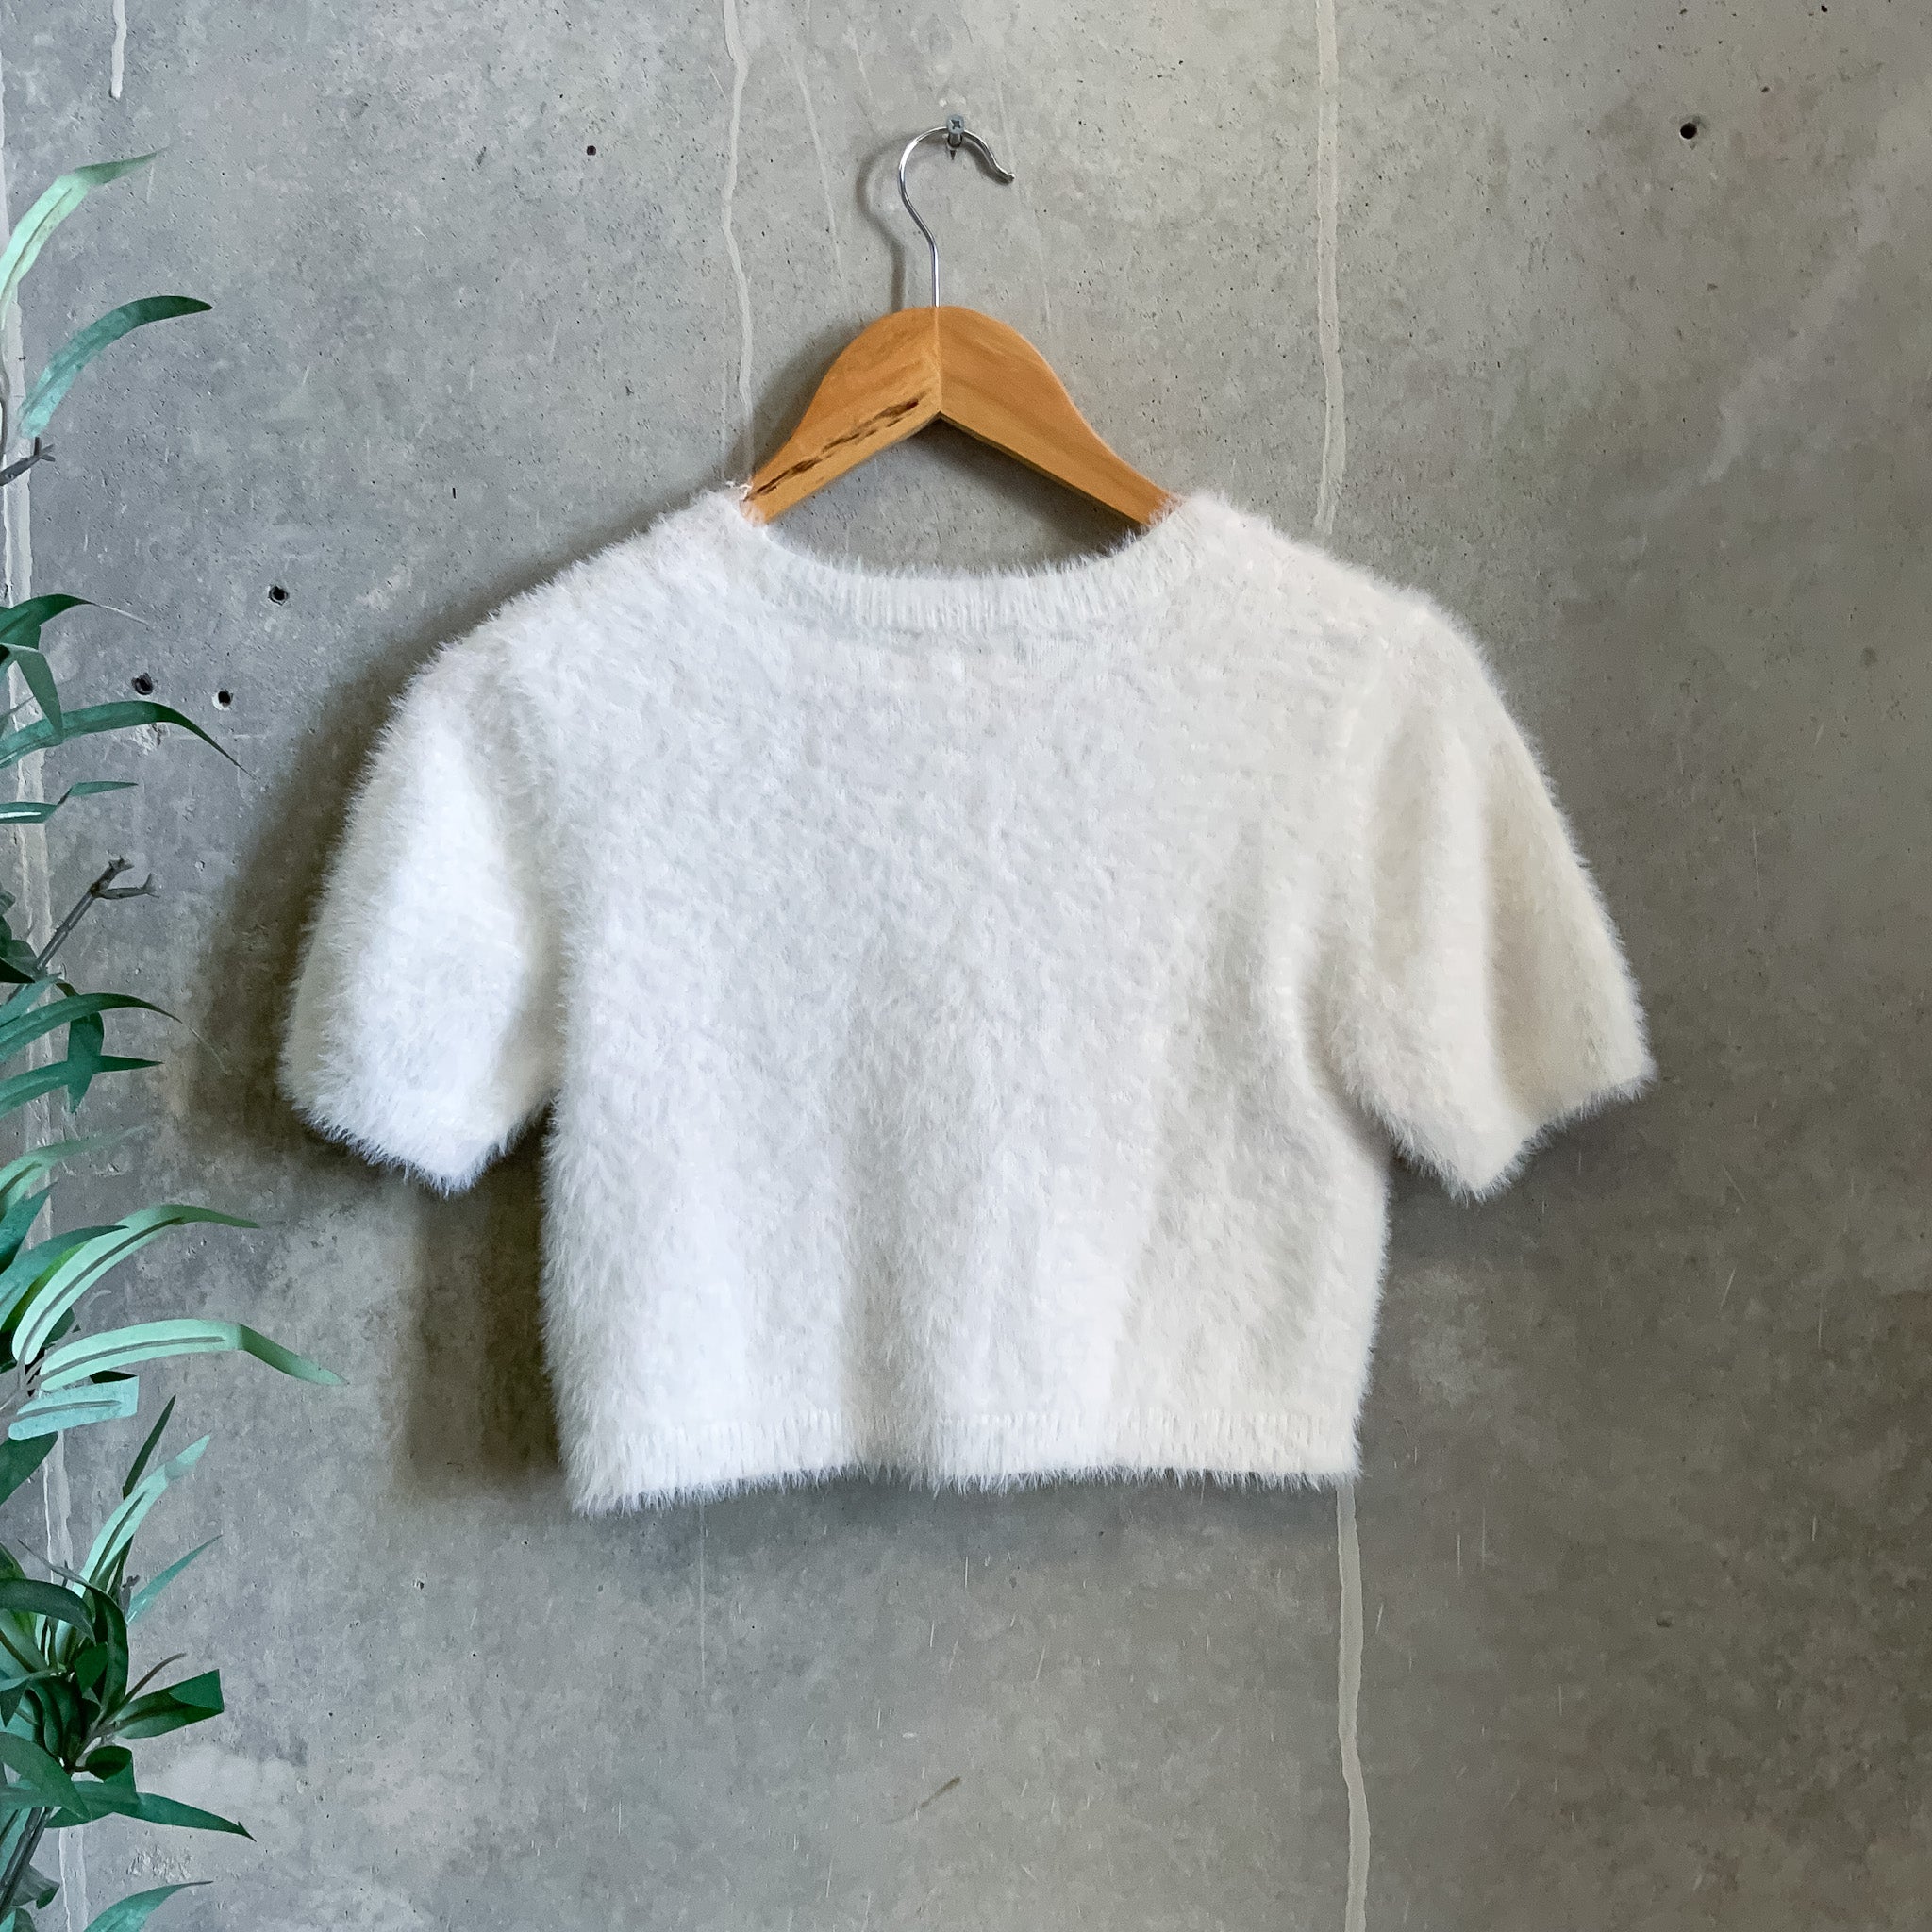 ALAMOUR White Crew Neck Short Sleeved Fluffy Knit Cropped Sweater/Top - Size M